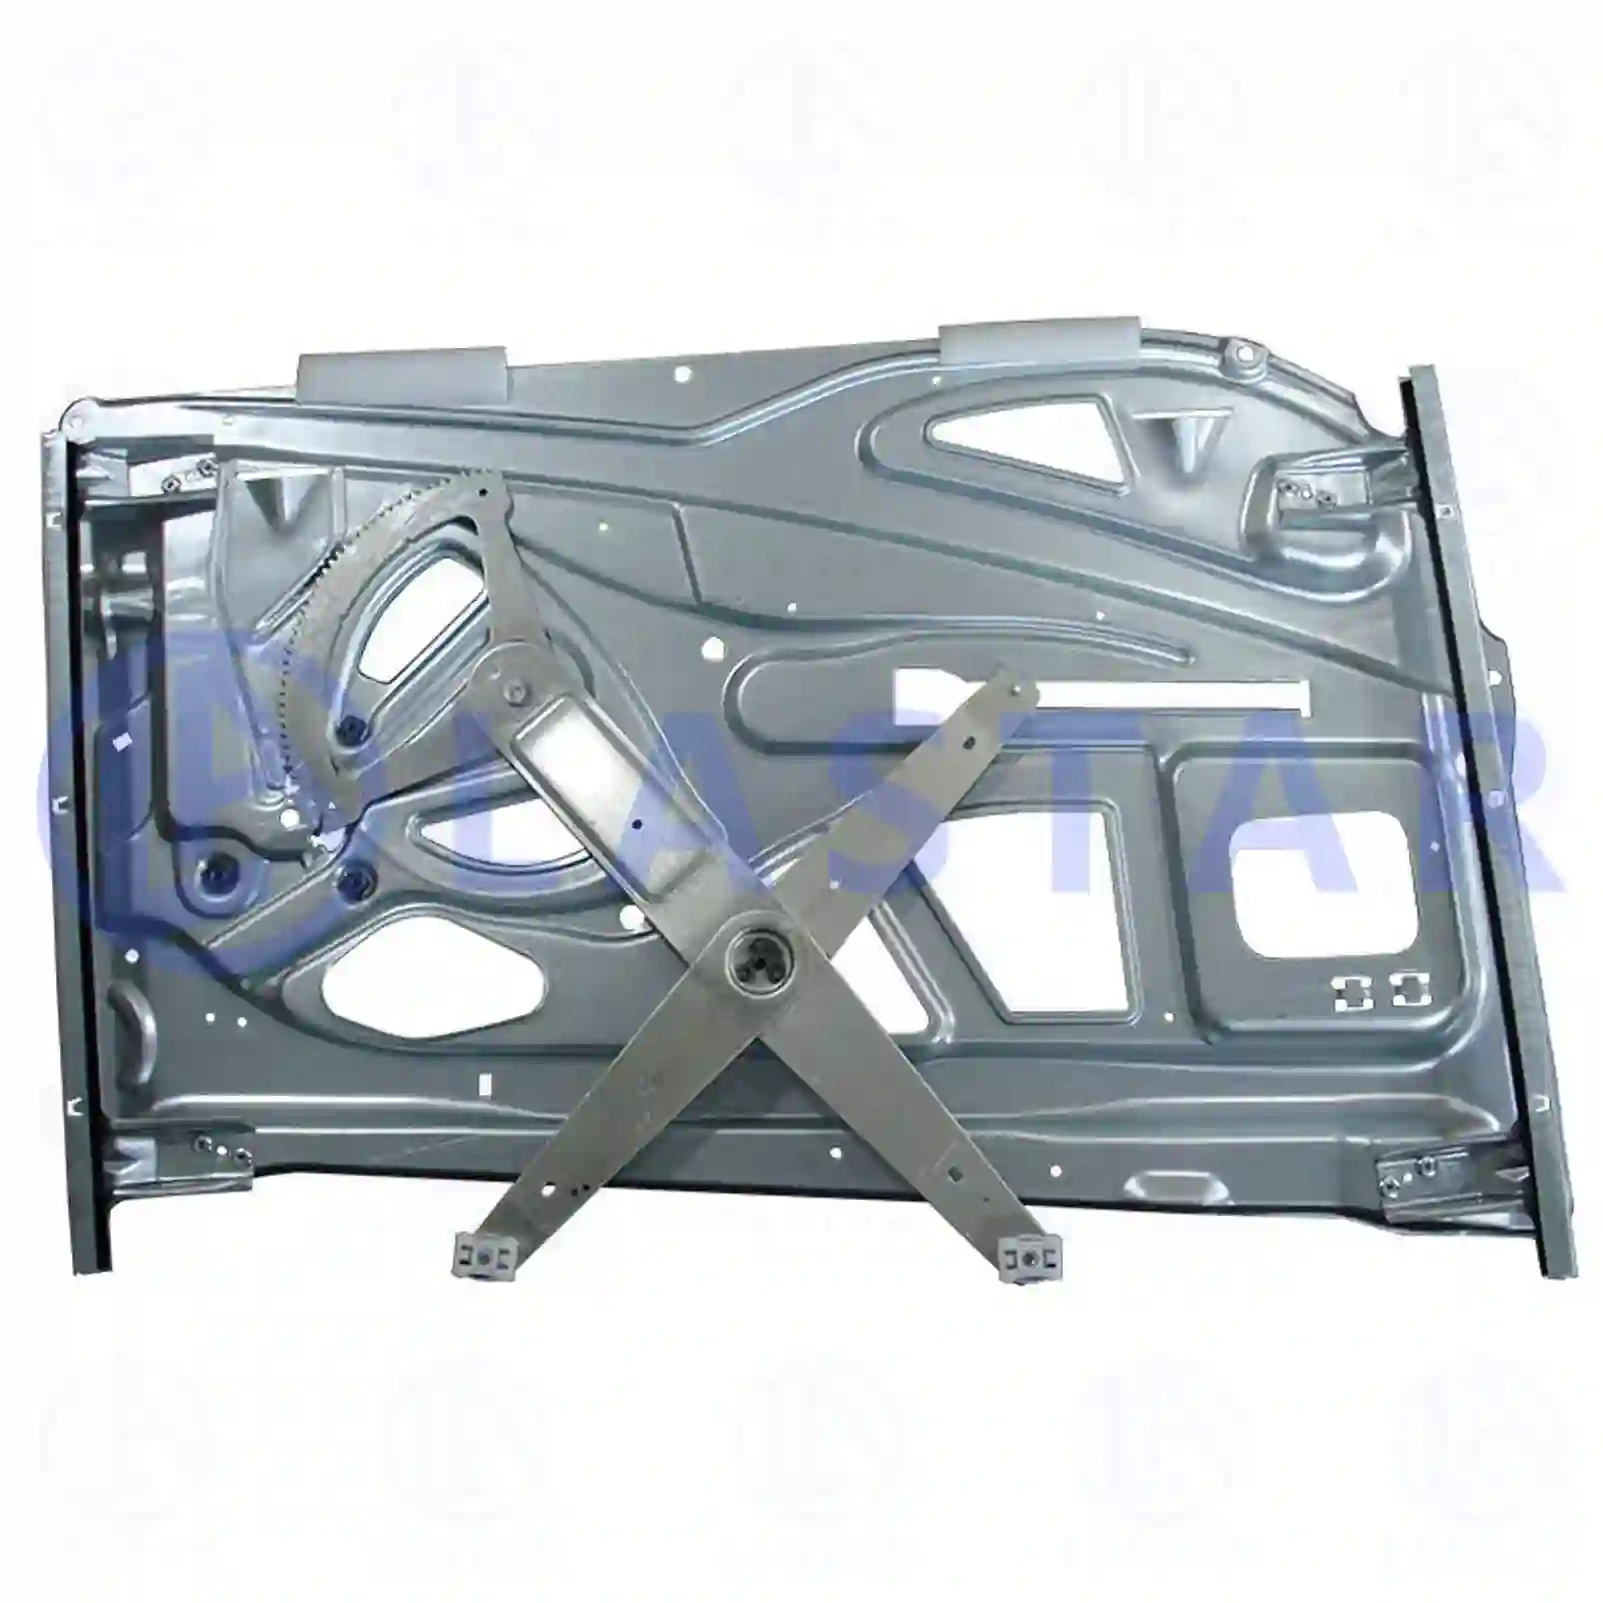 Window regulator, right, with support panel, 77718917, 0007200179, ZG61327-0008 ||  77718917 Lastar Spare Part | Truck Spare Parts, Auotomotive Spare Parts Window regulator, right, with support panel, 77718917, 0007200179, ZG61327-0008 ||  77718917 Lastar Spare Part | Truck Spare Parts, Auotomotive Spare Parts